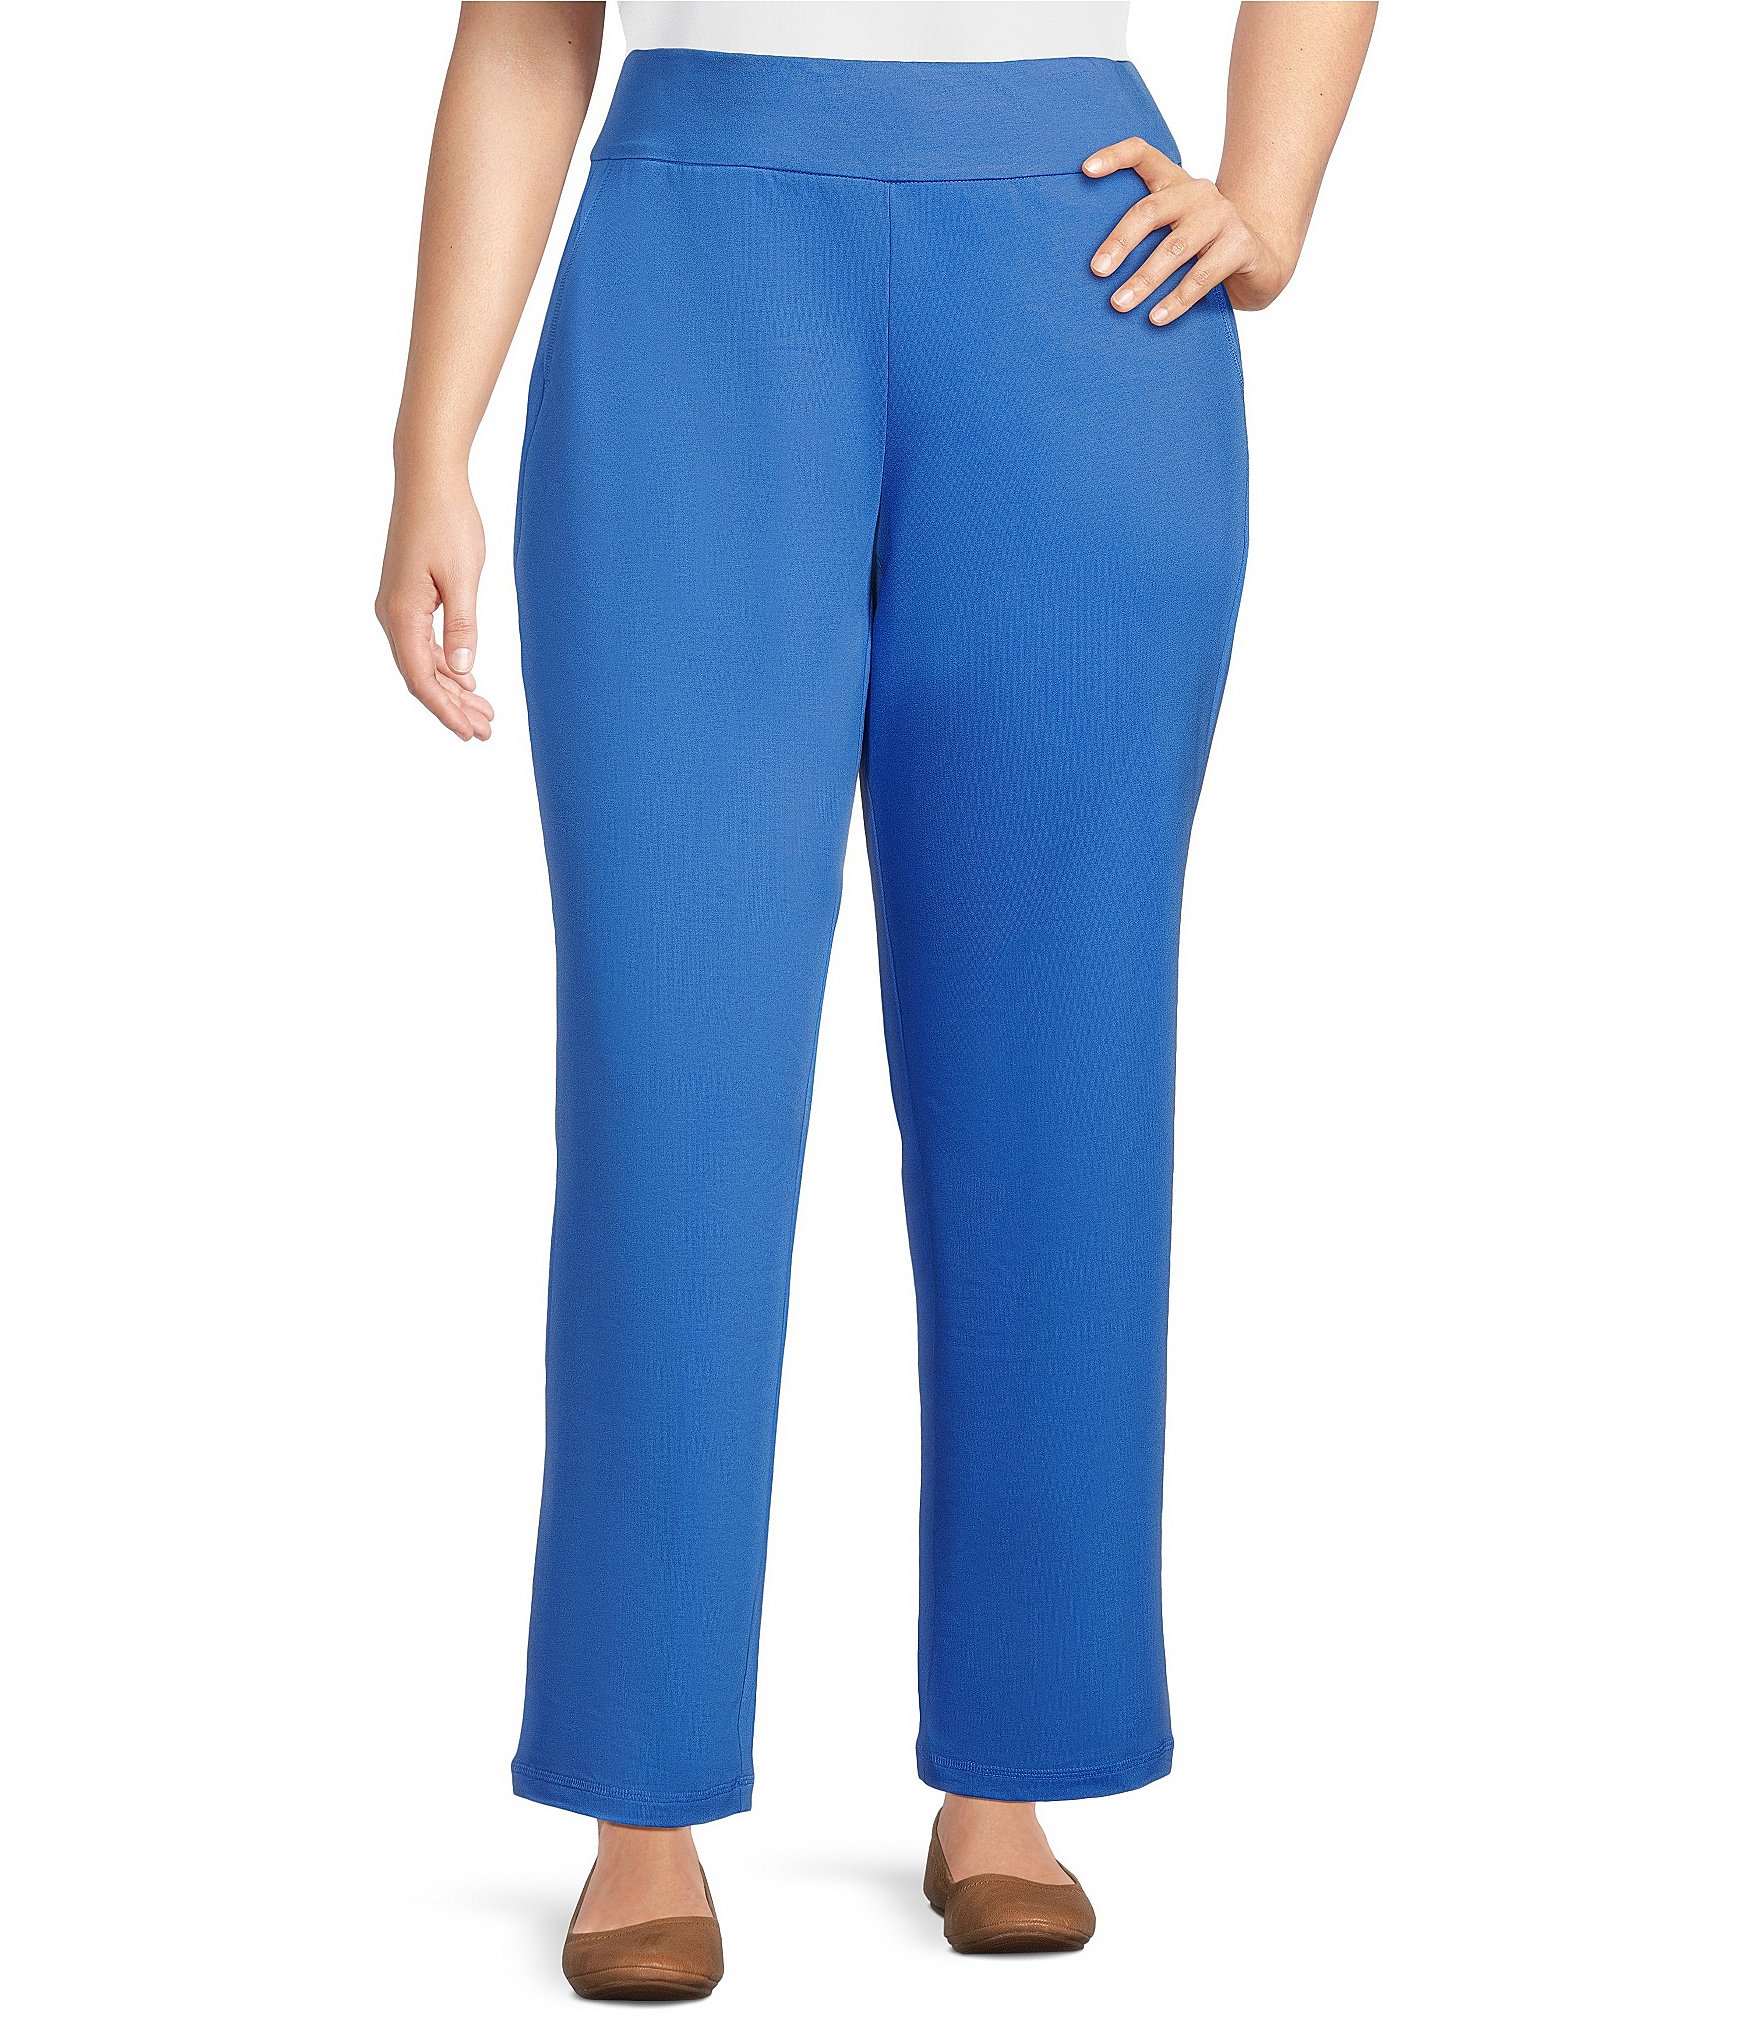 Allison Daley Plus Size Stretch Pull-On Straight Leg Pants